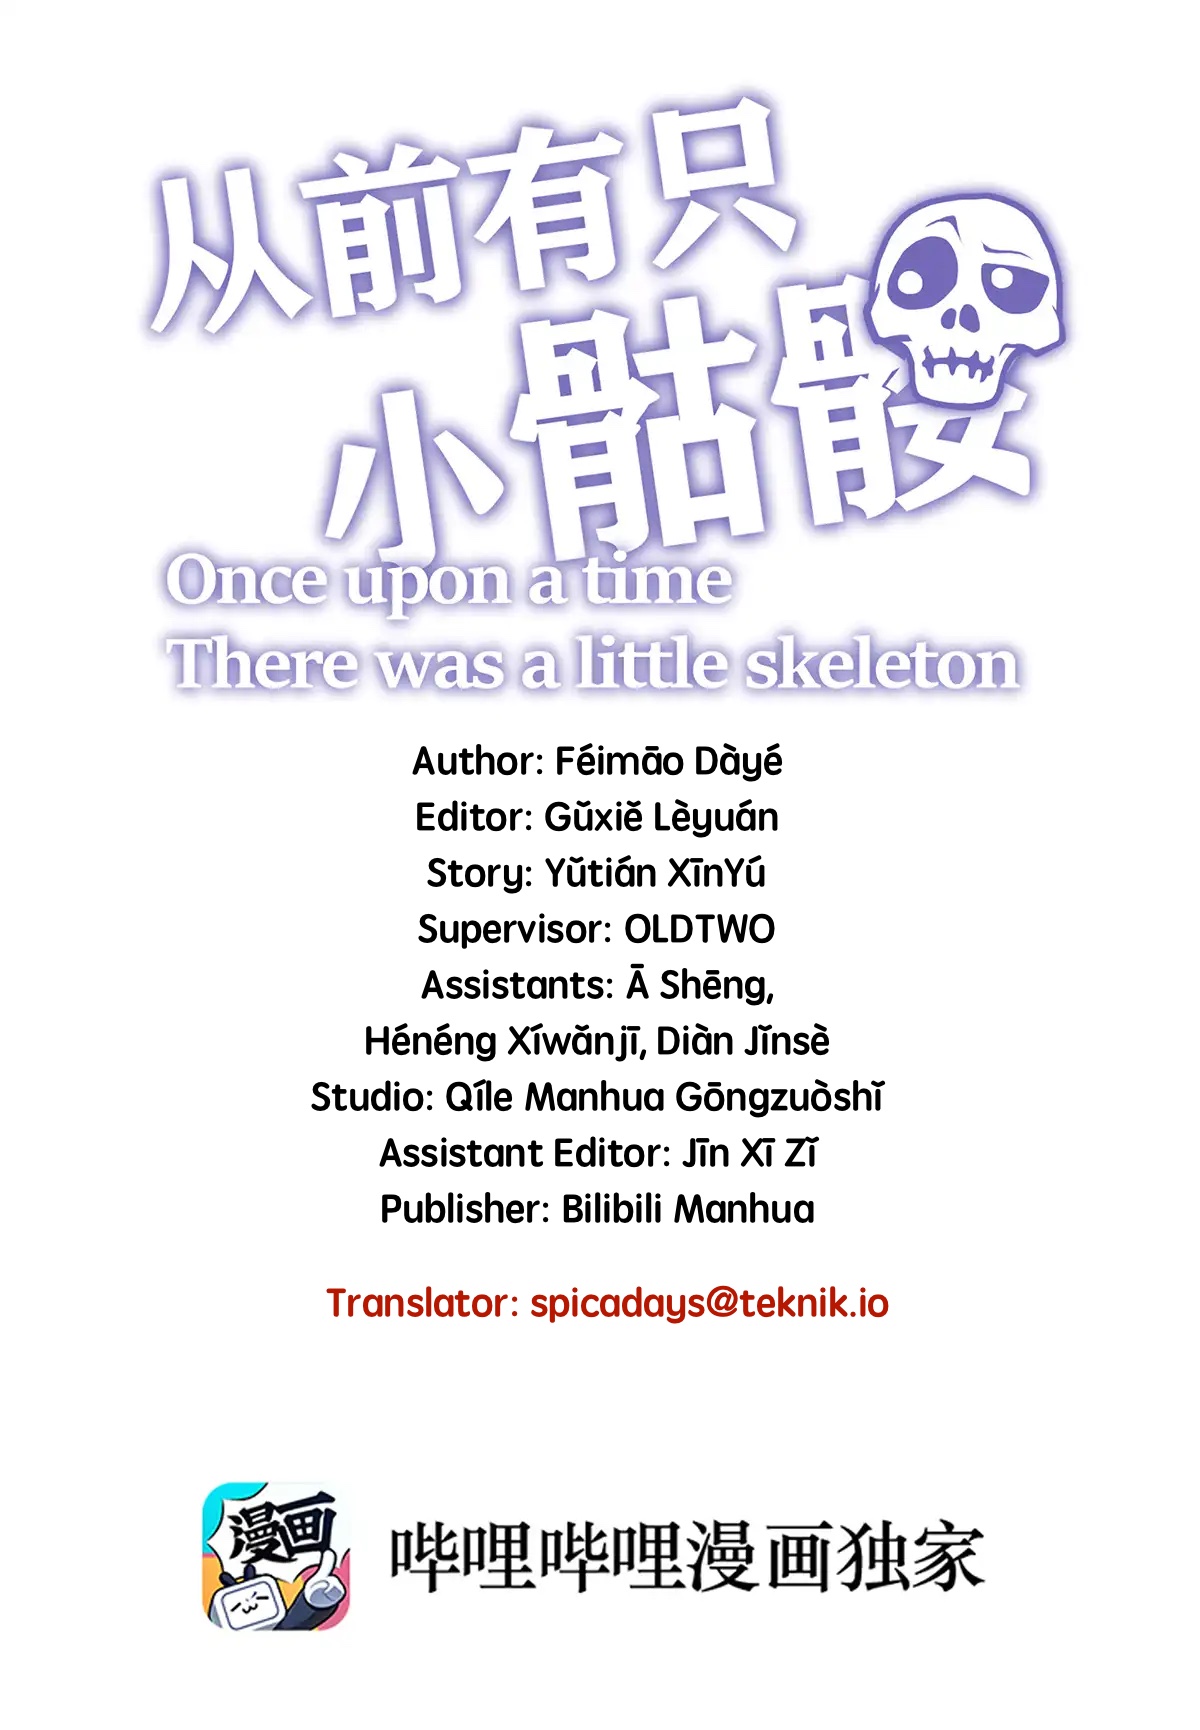 Little Skeleton Ch. 12 What sort of study method is this?